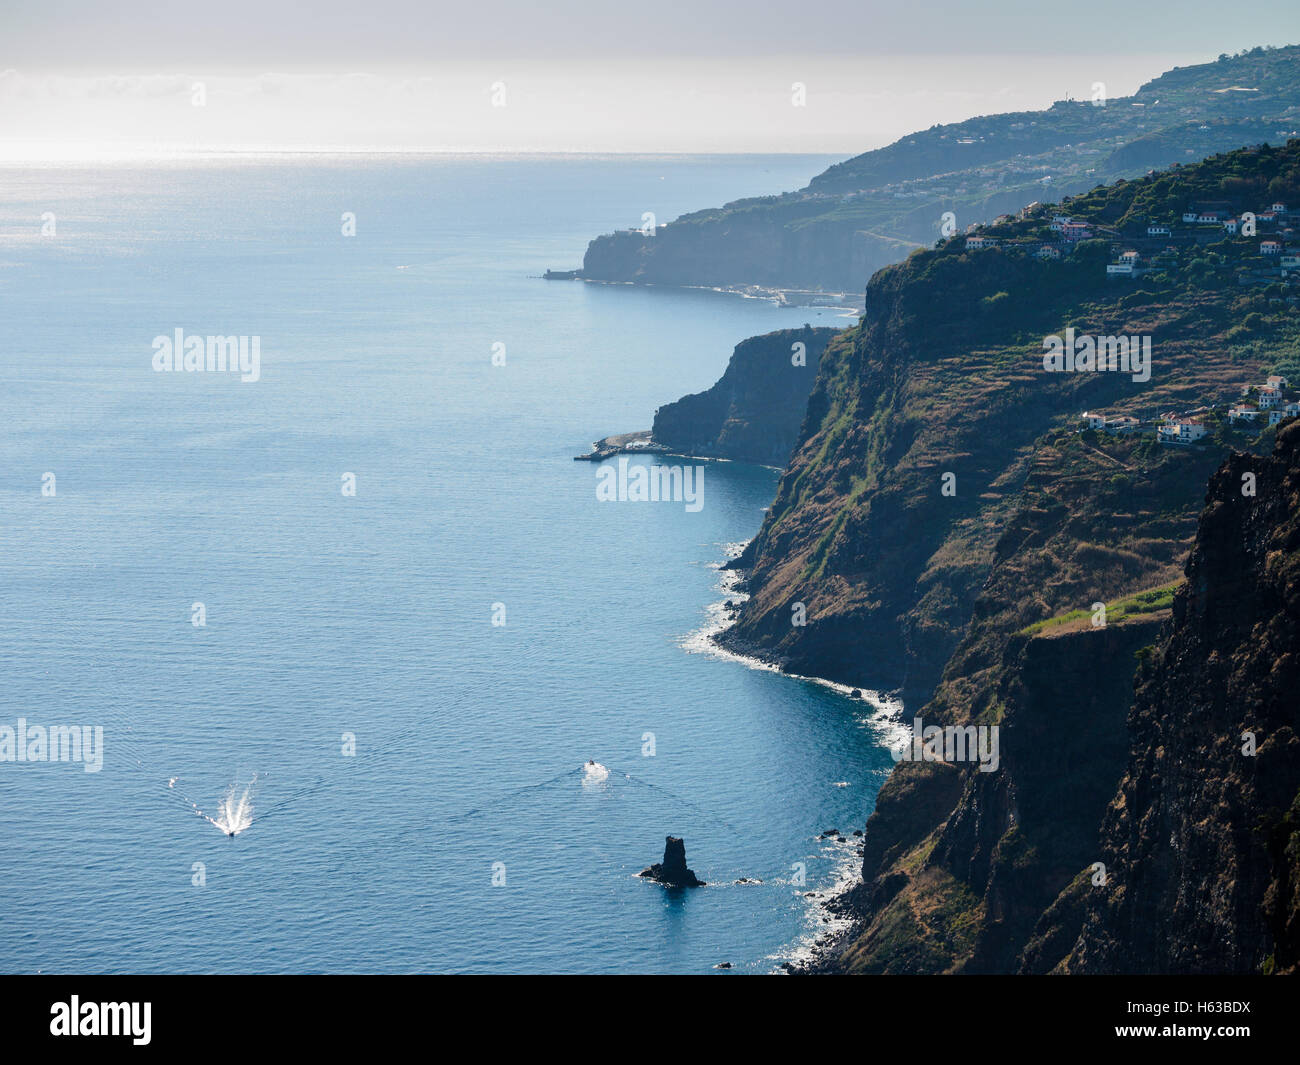 The South Coast between Faja dos Padres and Ponta do Sol on the Portuguese island of Madeira Stock Photo